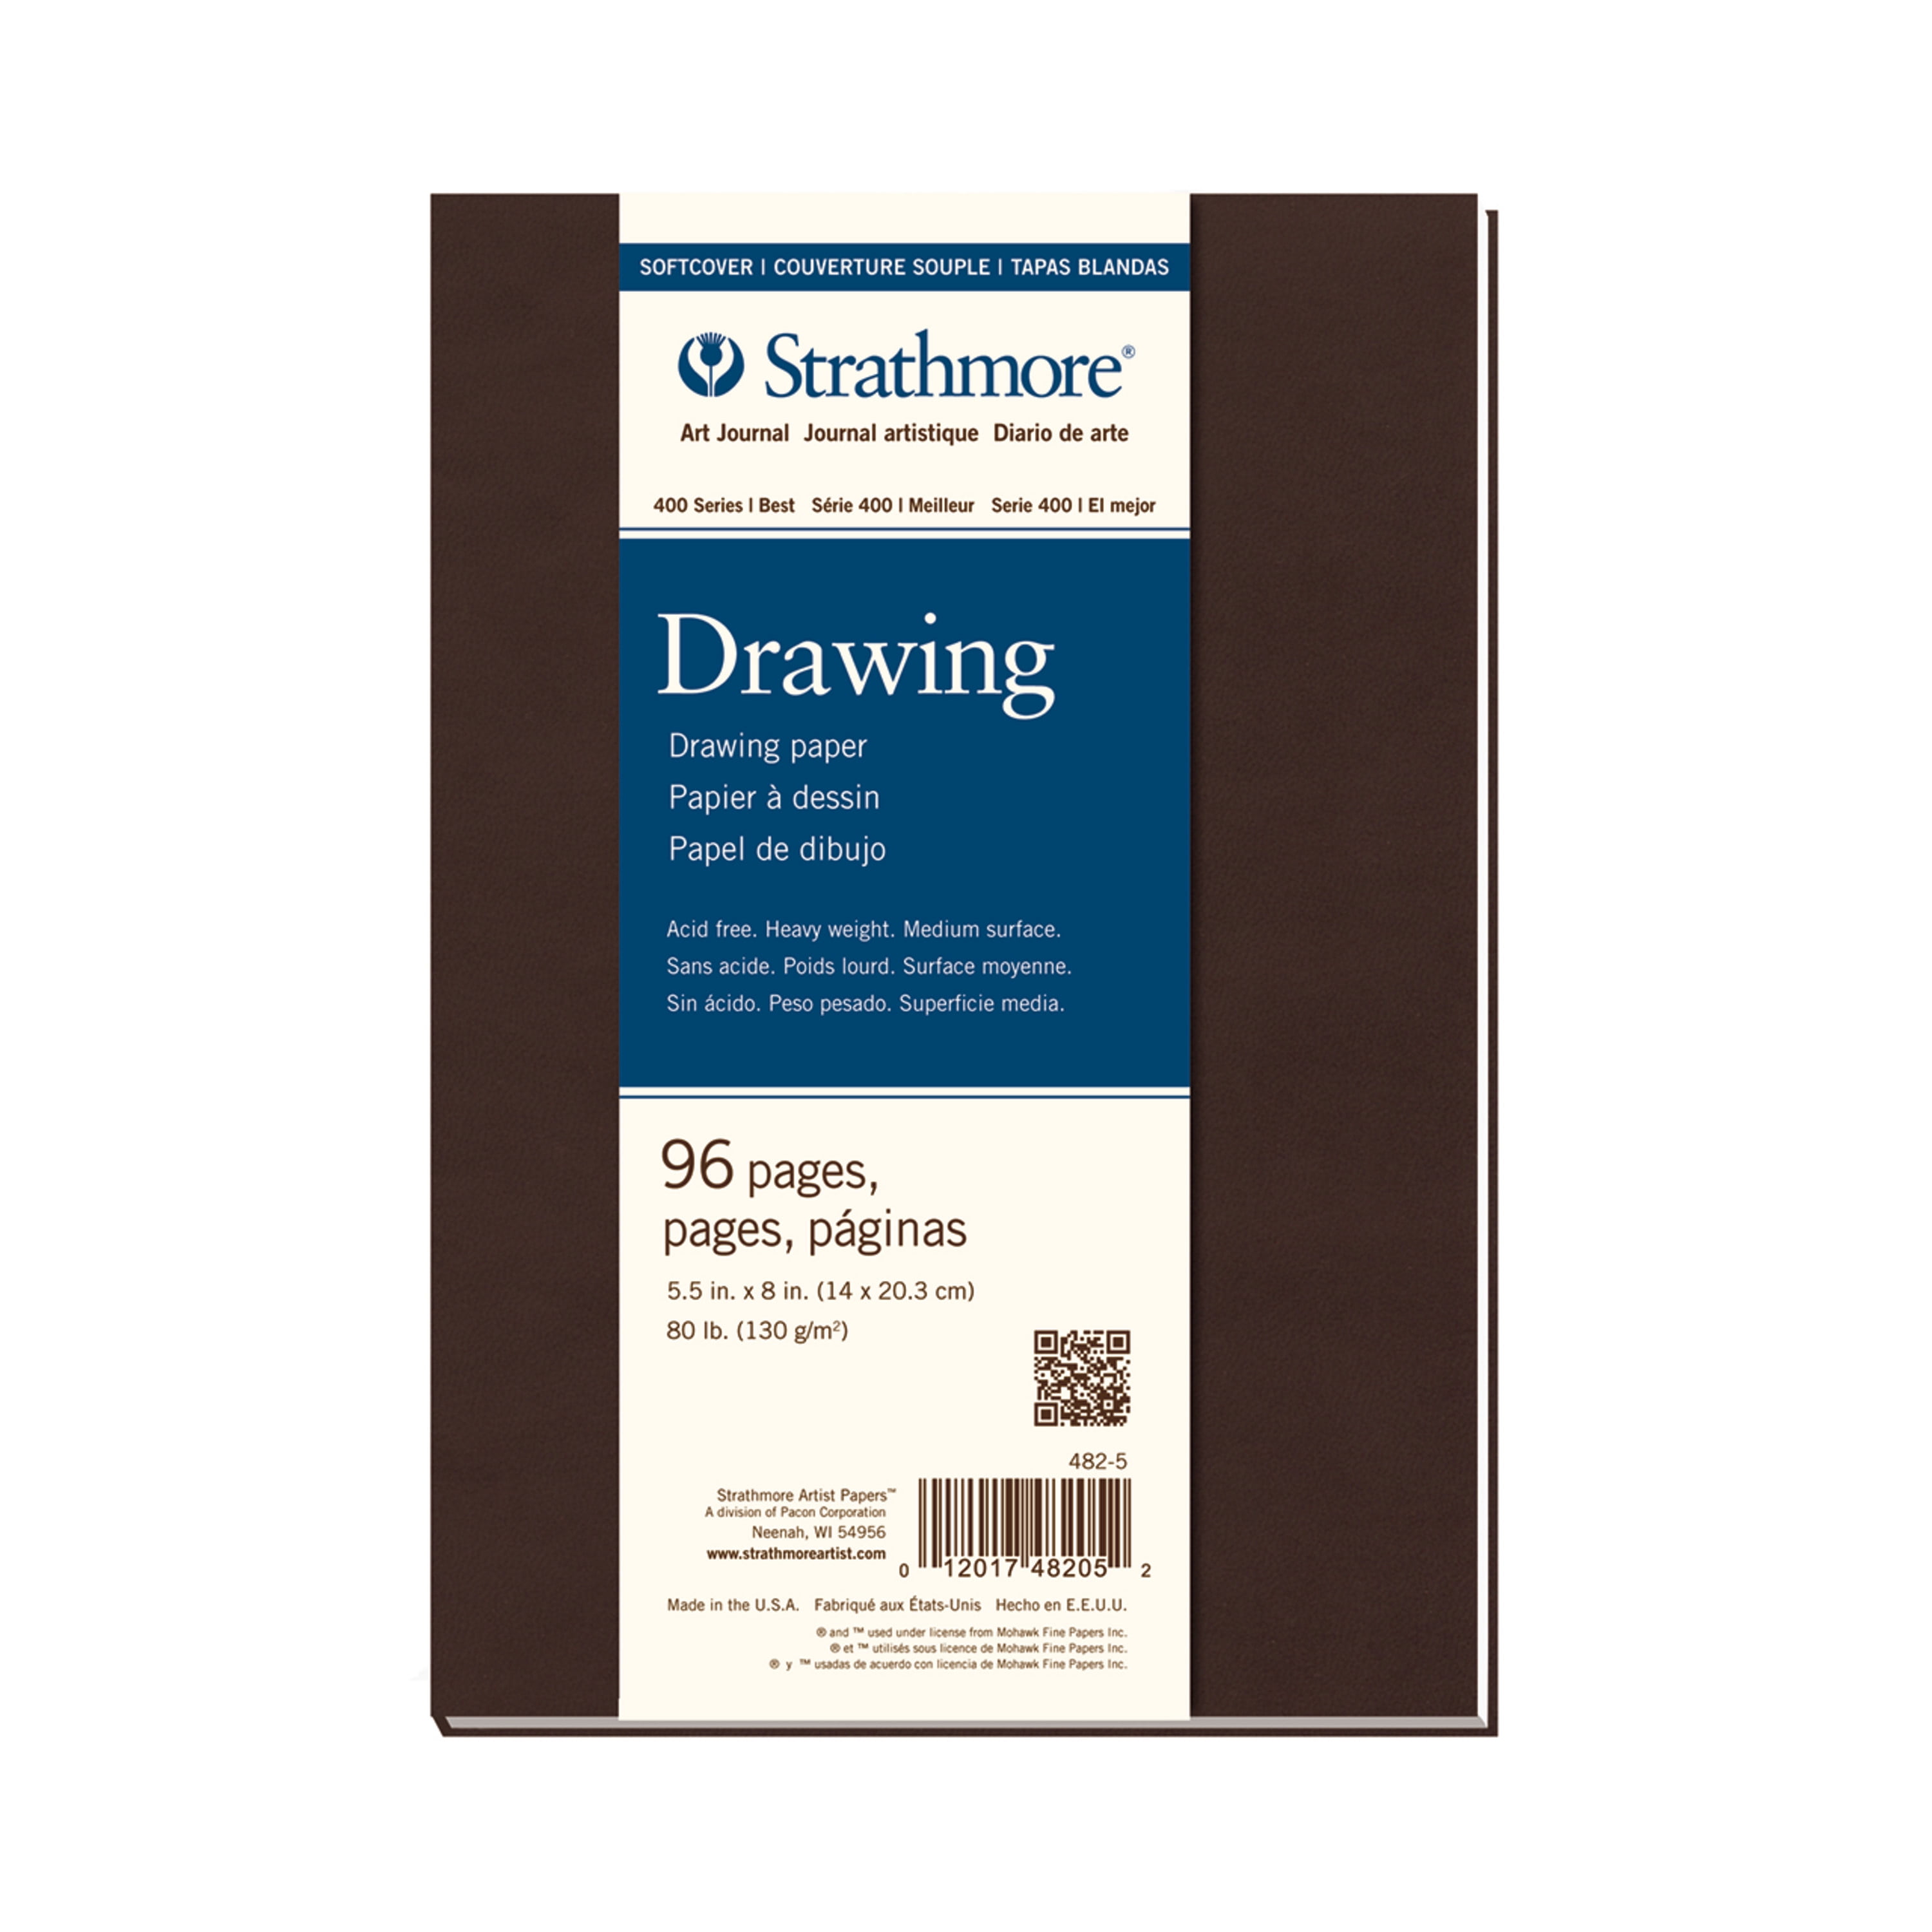 Strathmore 400 Series Acrylic Pad - 18 x 24, 10 Sheets